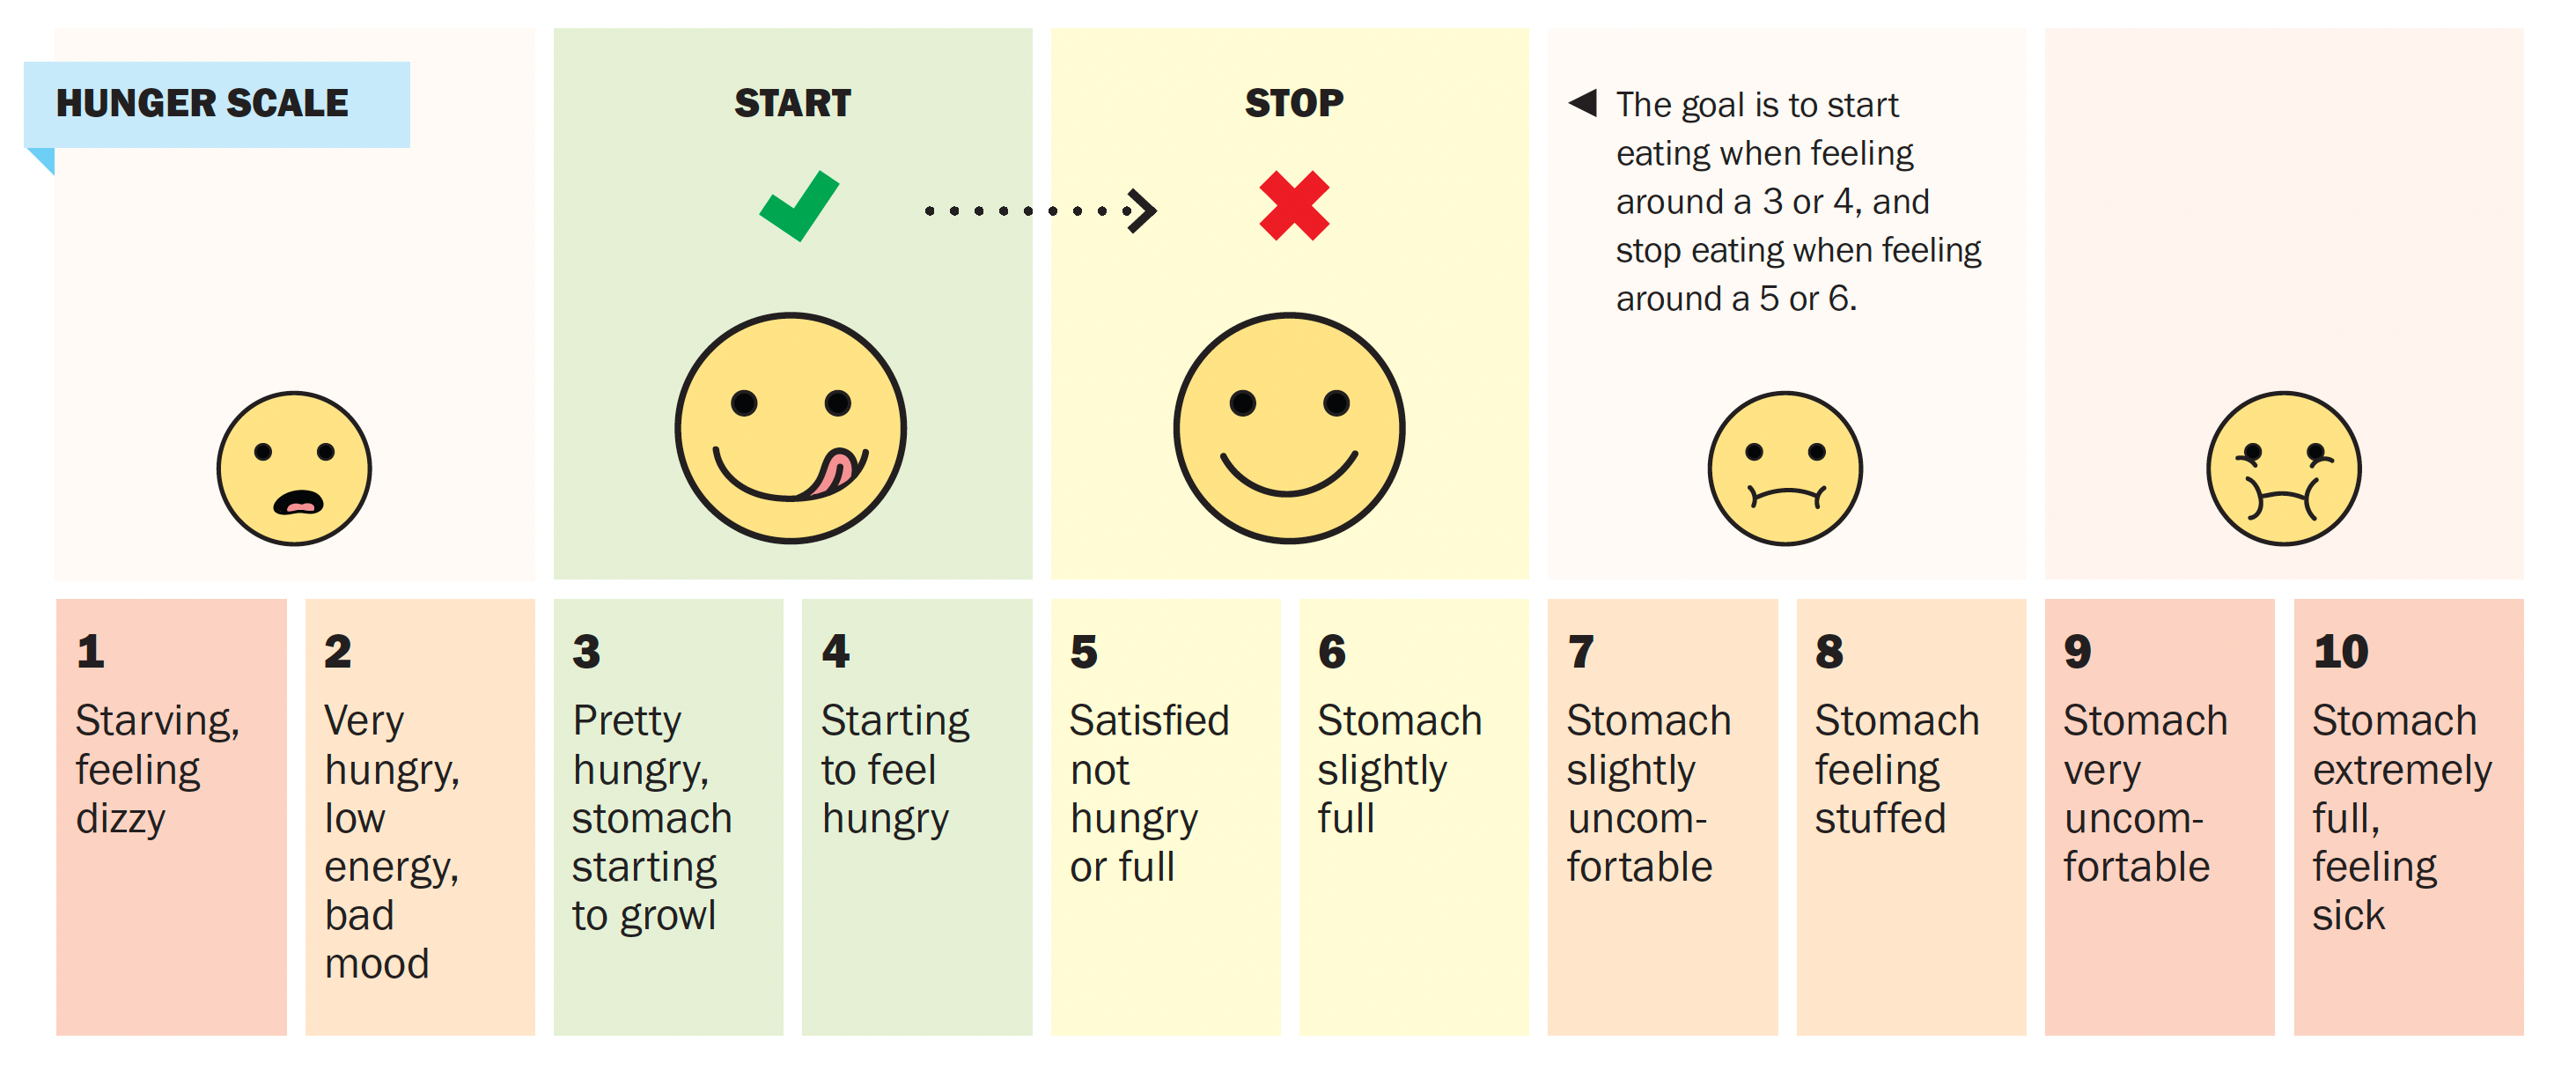 Hunger Scale designed by Josh McCarthy